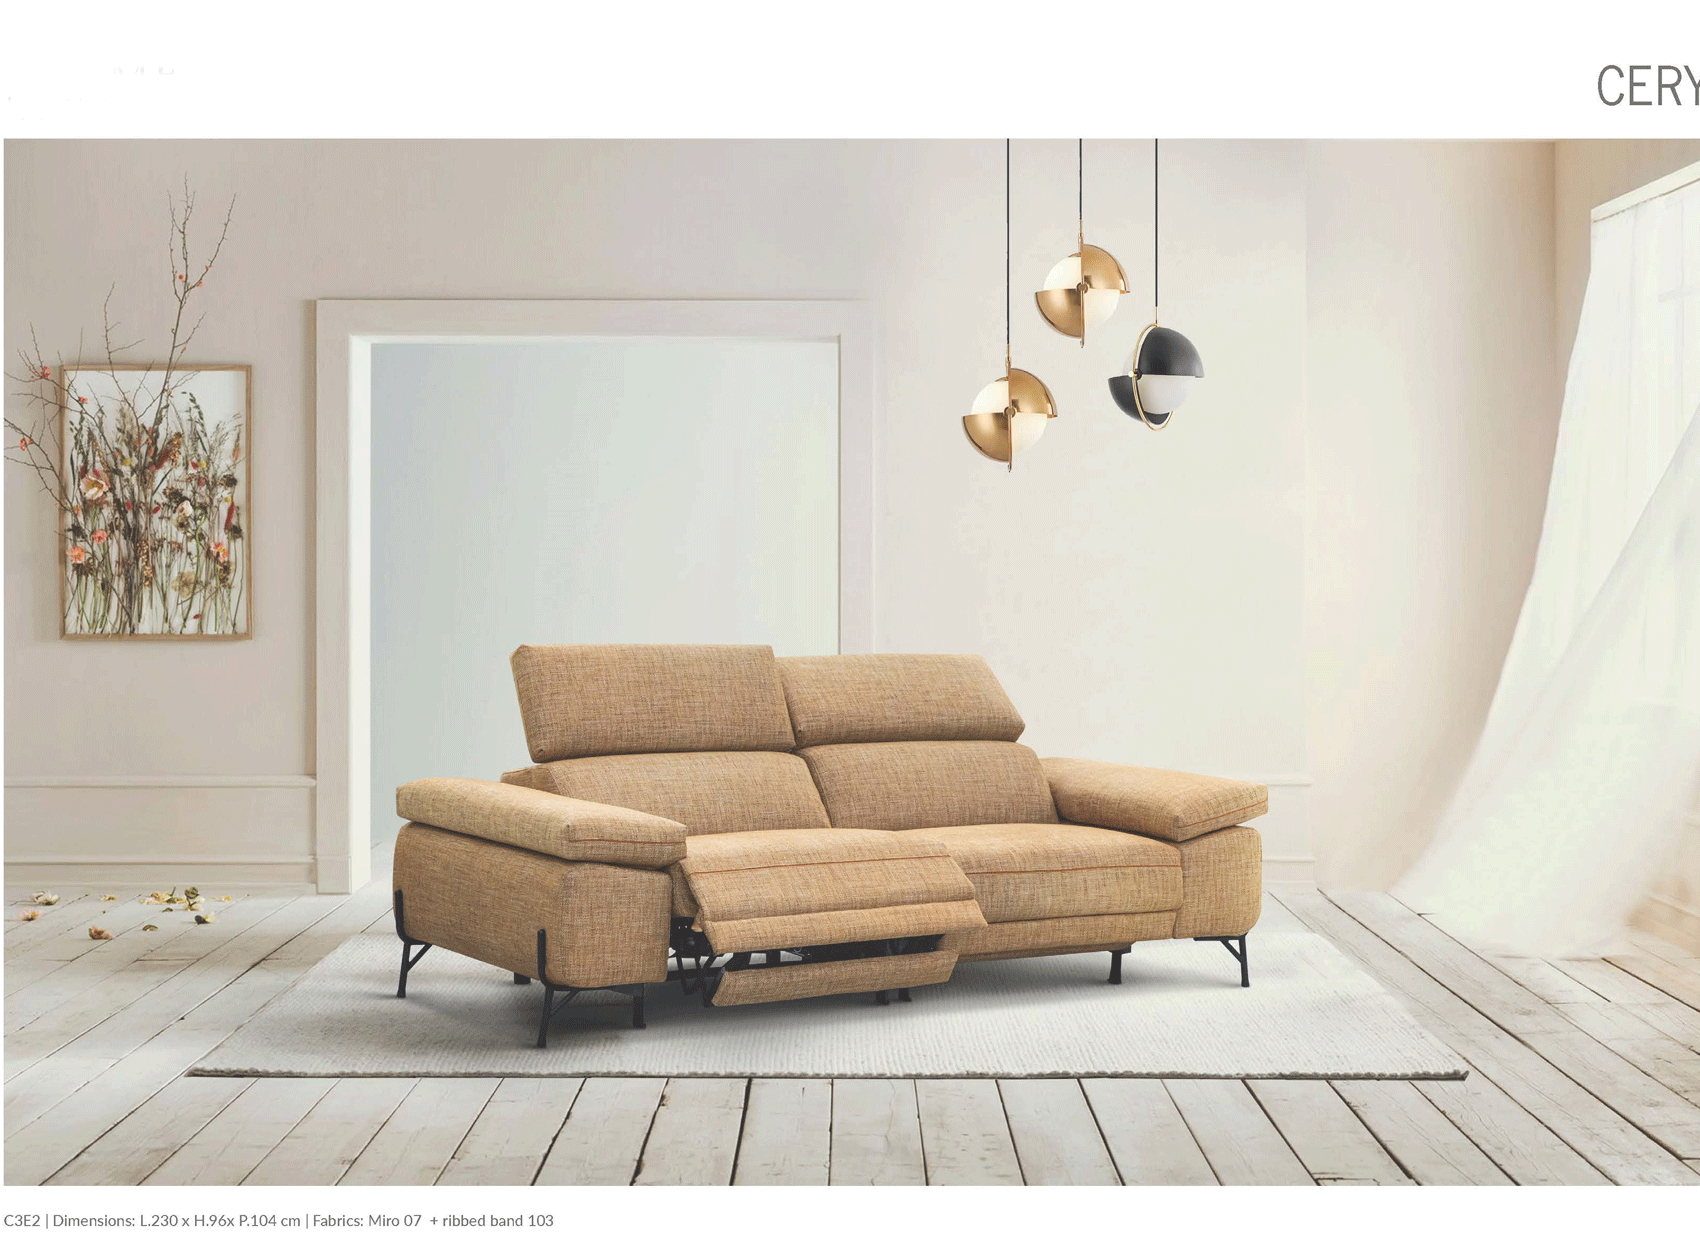 Brands Arredoclassic Living Room, Italy Cery Sofa w/recliner